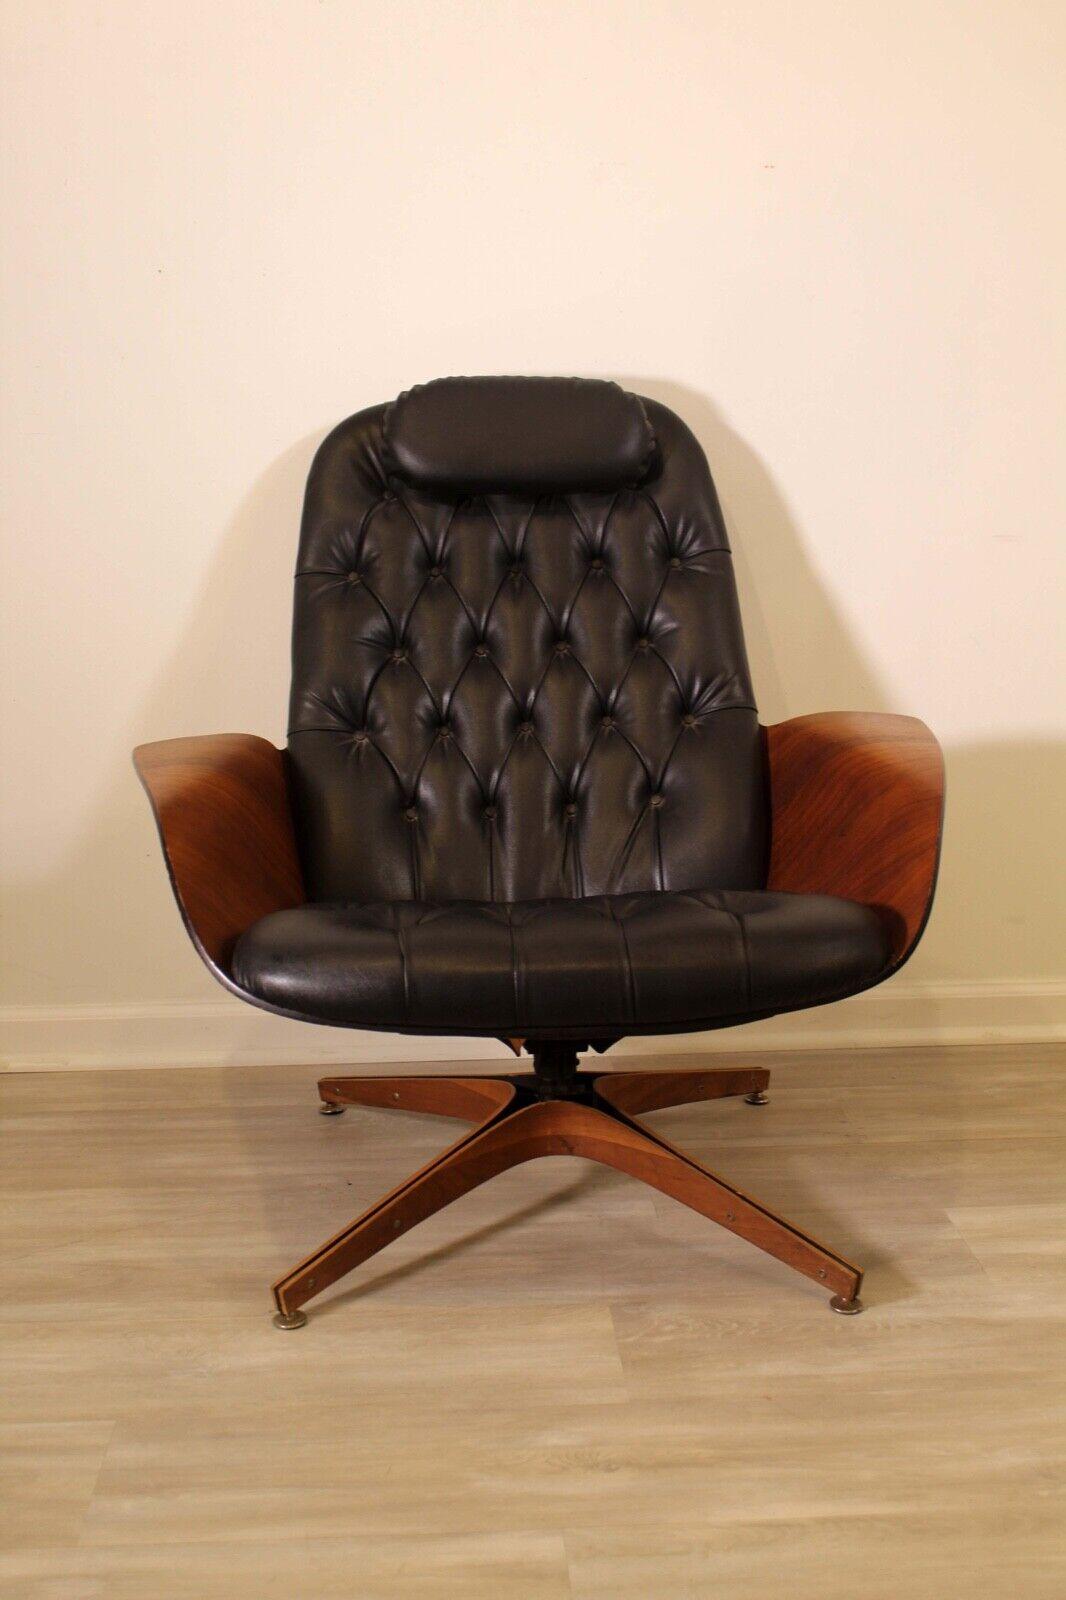 An Iconic George Mulhauser Plycraft swivel chair up for consideration. In very good condition.

Dimensions: 36